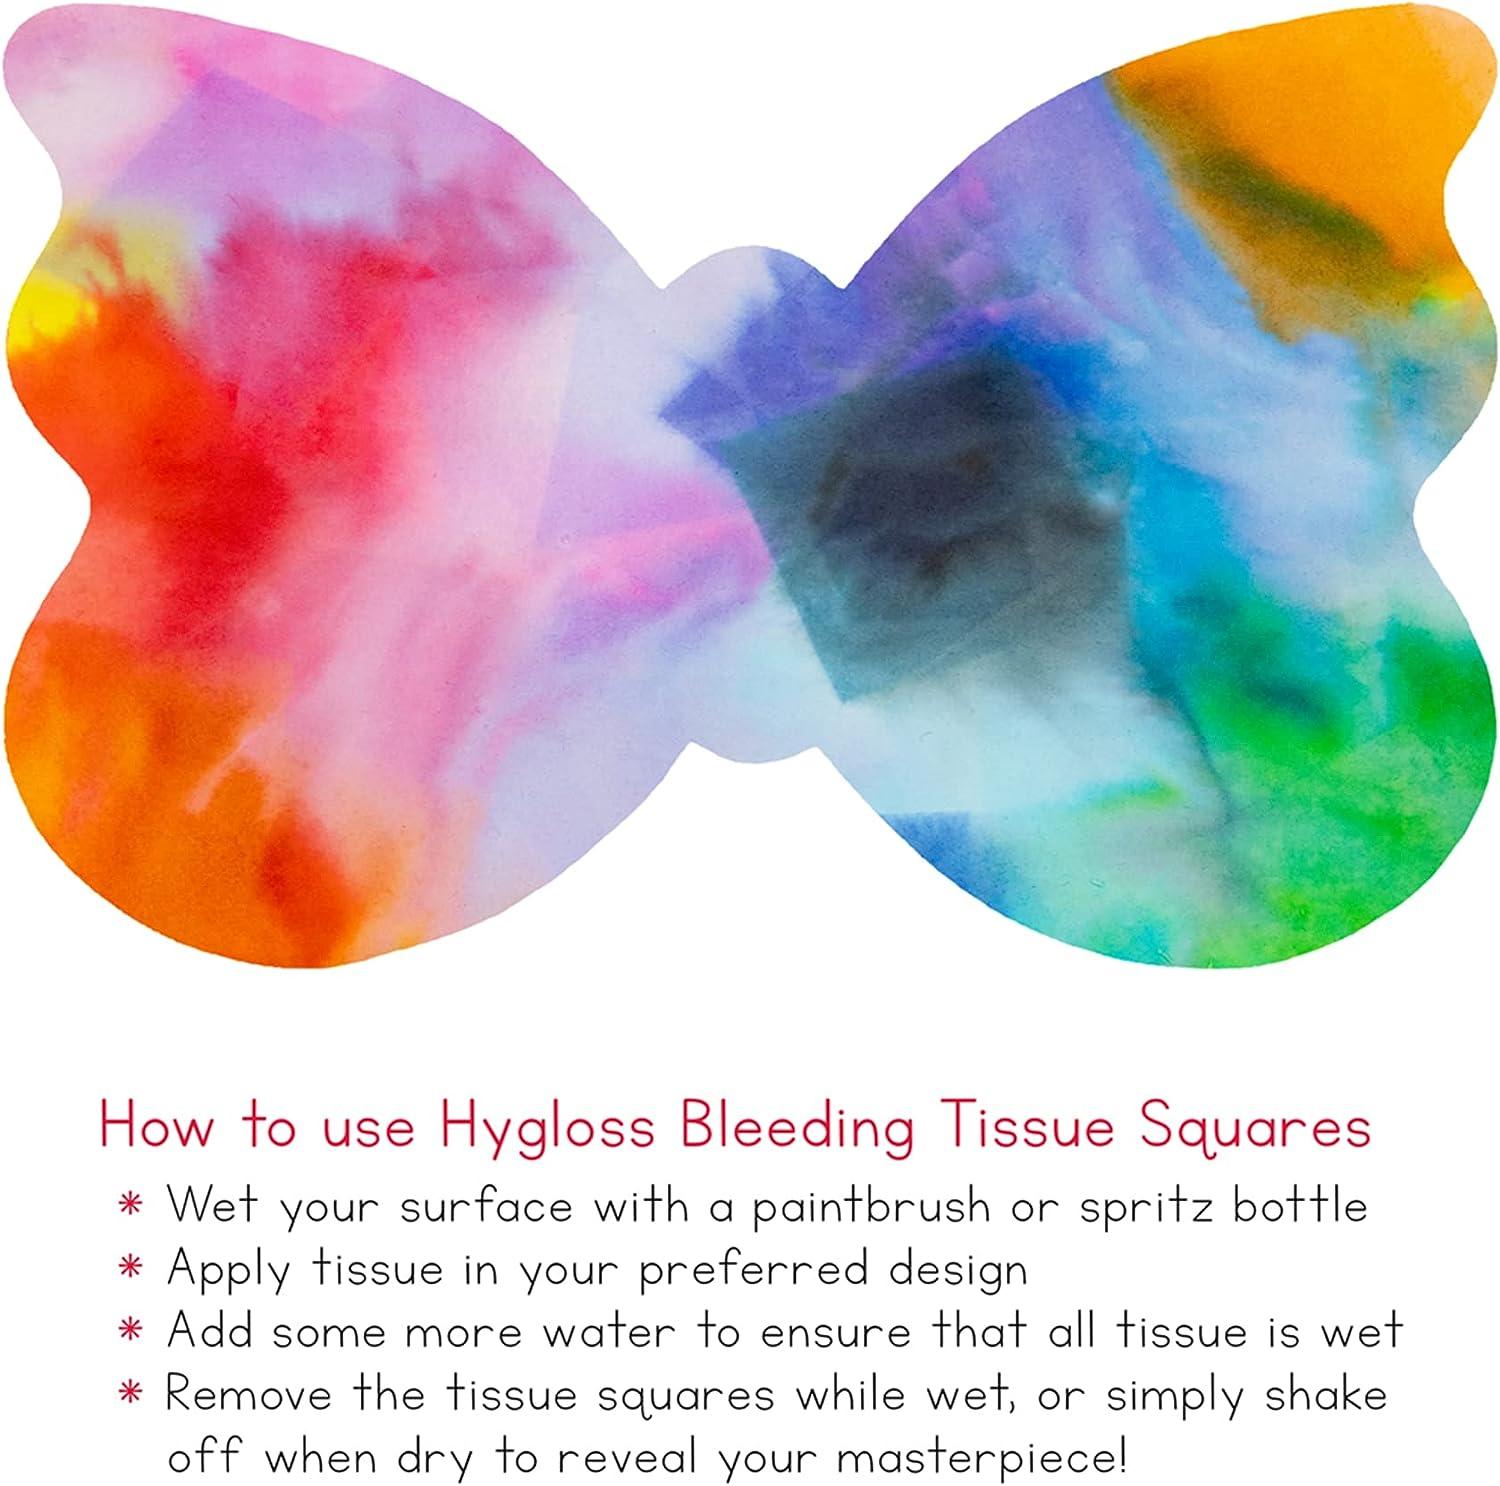 Hygloss Products Bleeding Tissue Paper Squares 1-Inch 20 Assorted Colors  for Arts & Crafts DIY Projects Scrapbooking Greeting Cards 2400 Squares  1-Inch 2400 Pcs